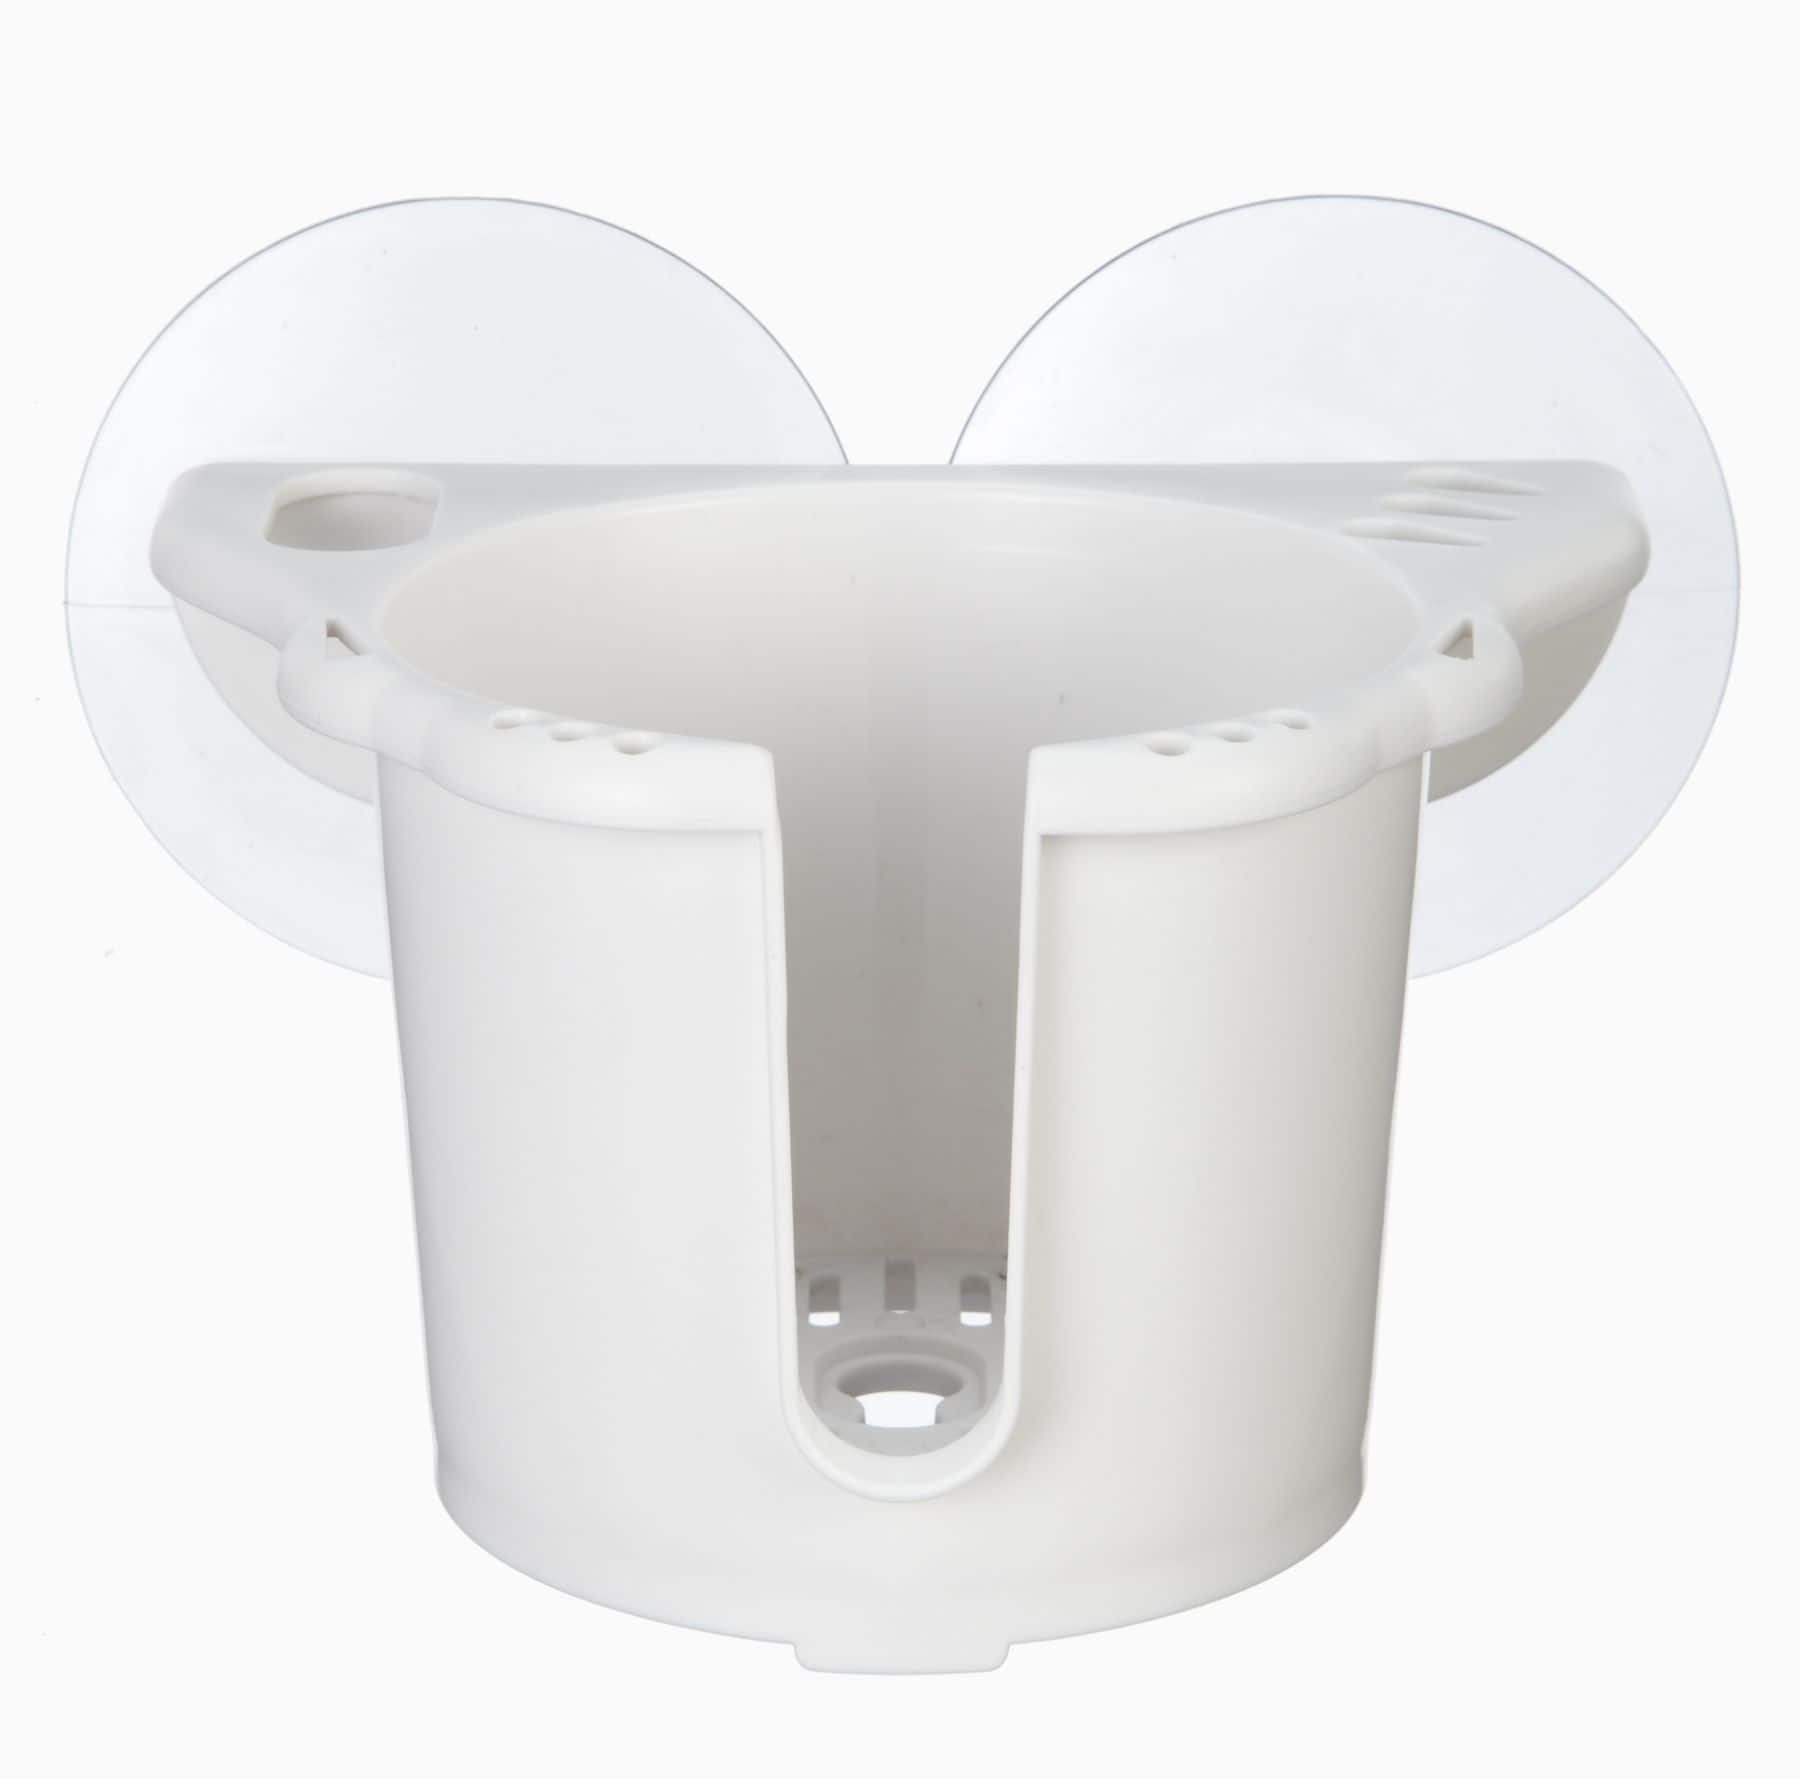 https://media-www.canadiantire.ca/product/playing/seasonal-recreation/marine-power-boating/0792484/drink-holder-suction-cup-2915afa7-d2d4-4a30-b27c-1b1037041d76-jpgrendition.jpg